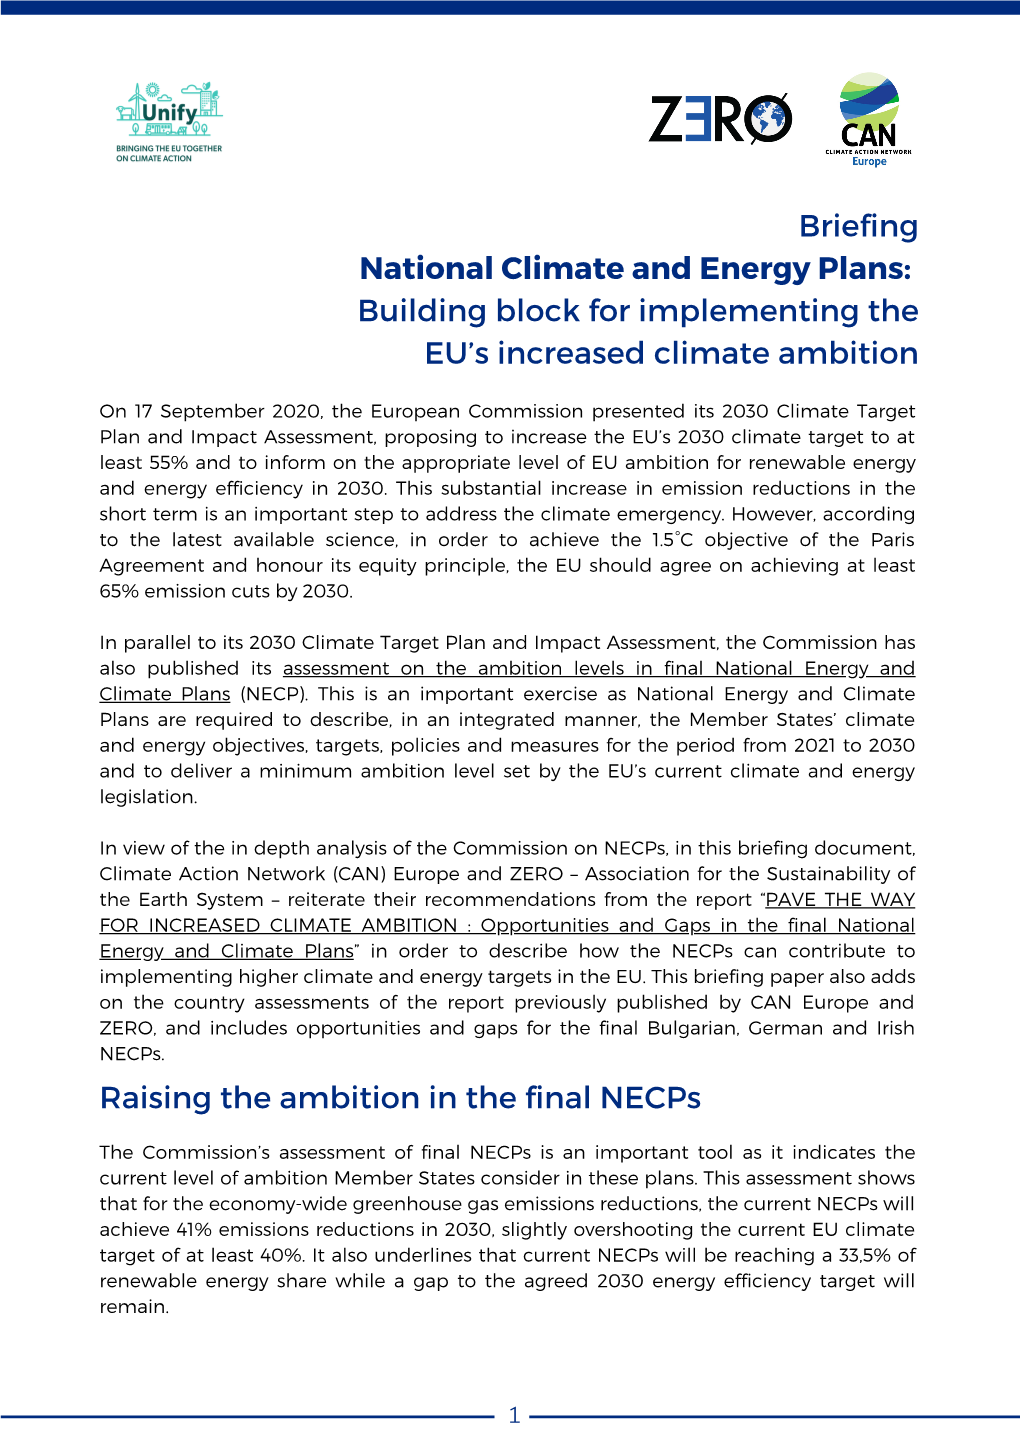 National Climate and Energy Plans: Building Block for Implementing the EU’S Increased Climate Ambition